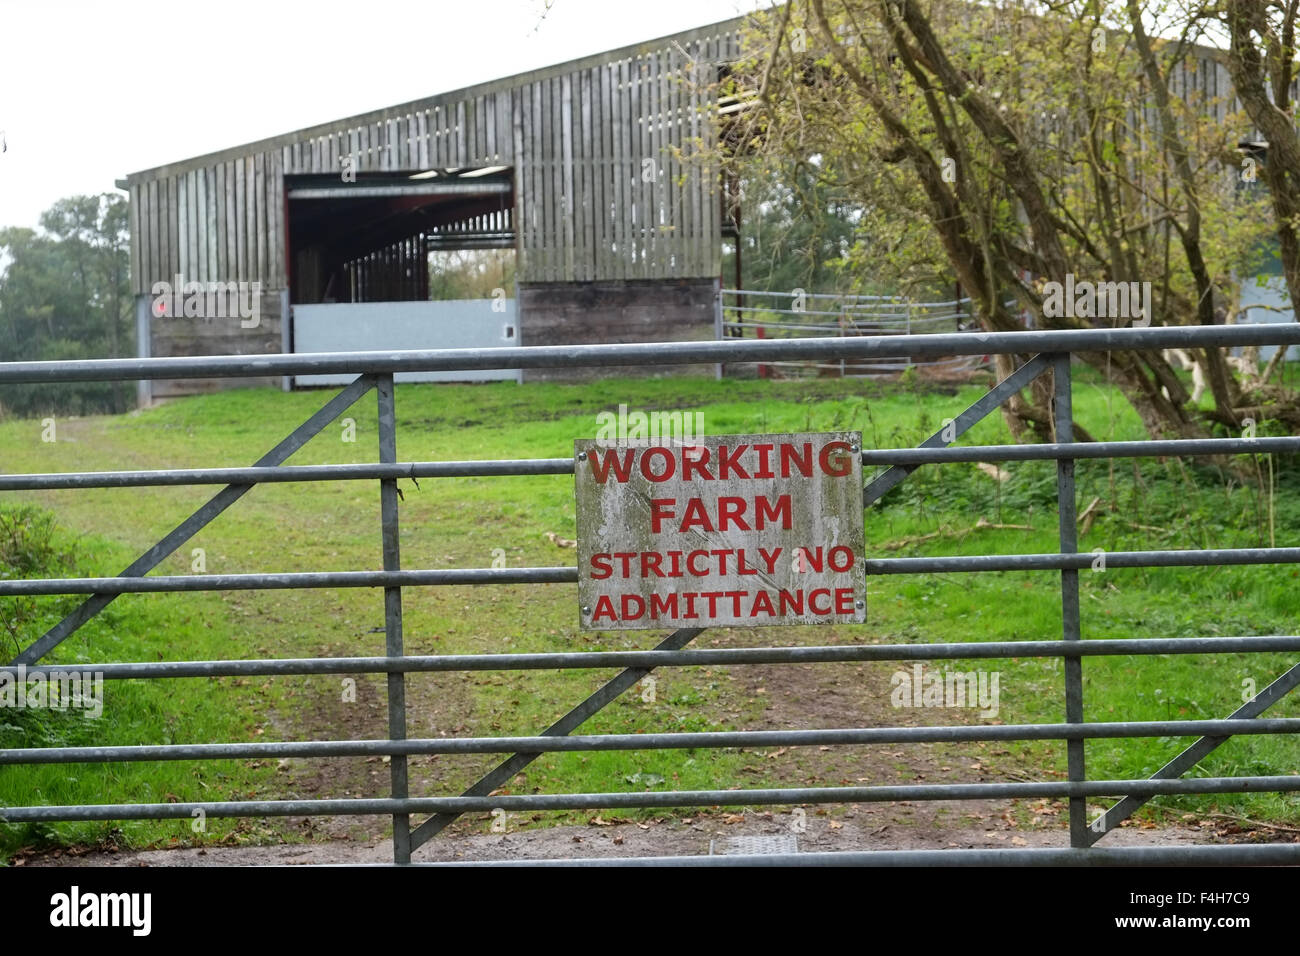 Sign for working farm, strictly no admittance on gate in rural Somerset, England. October 2015 Stock Photo